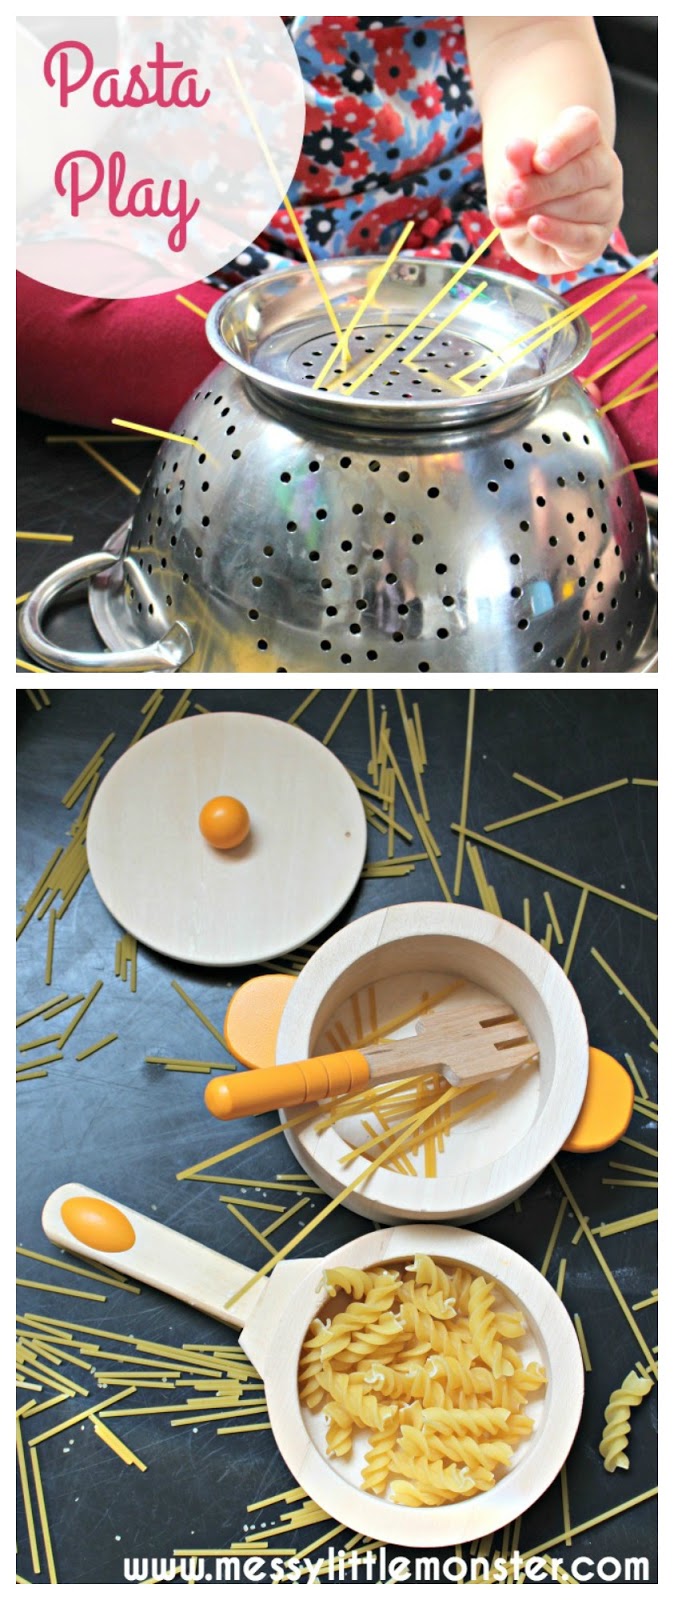 Pasta play -  Simple play activity ideas for toddlers and preschoolers. Use pasta and spaghetti to work on fine motor skills.